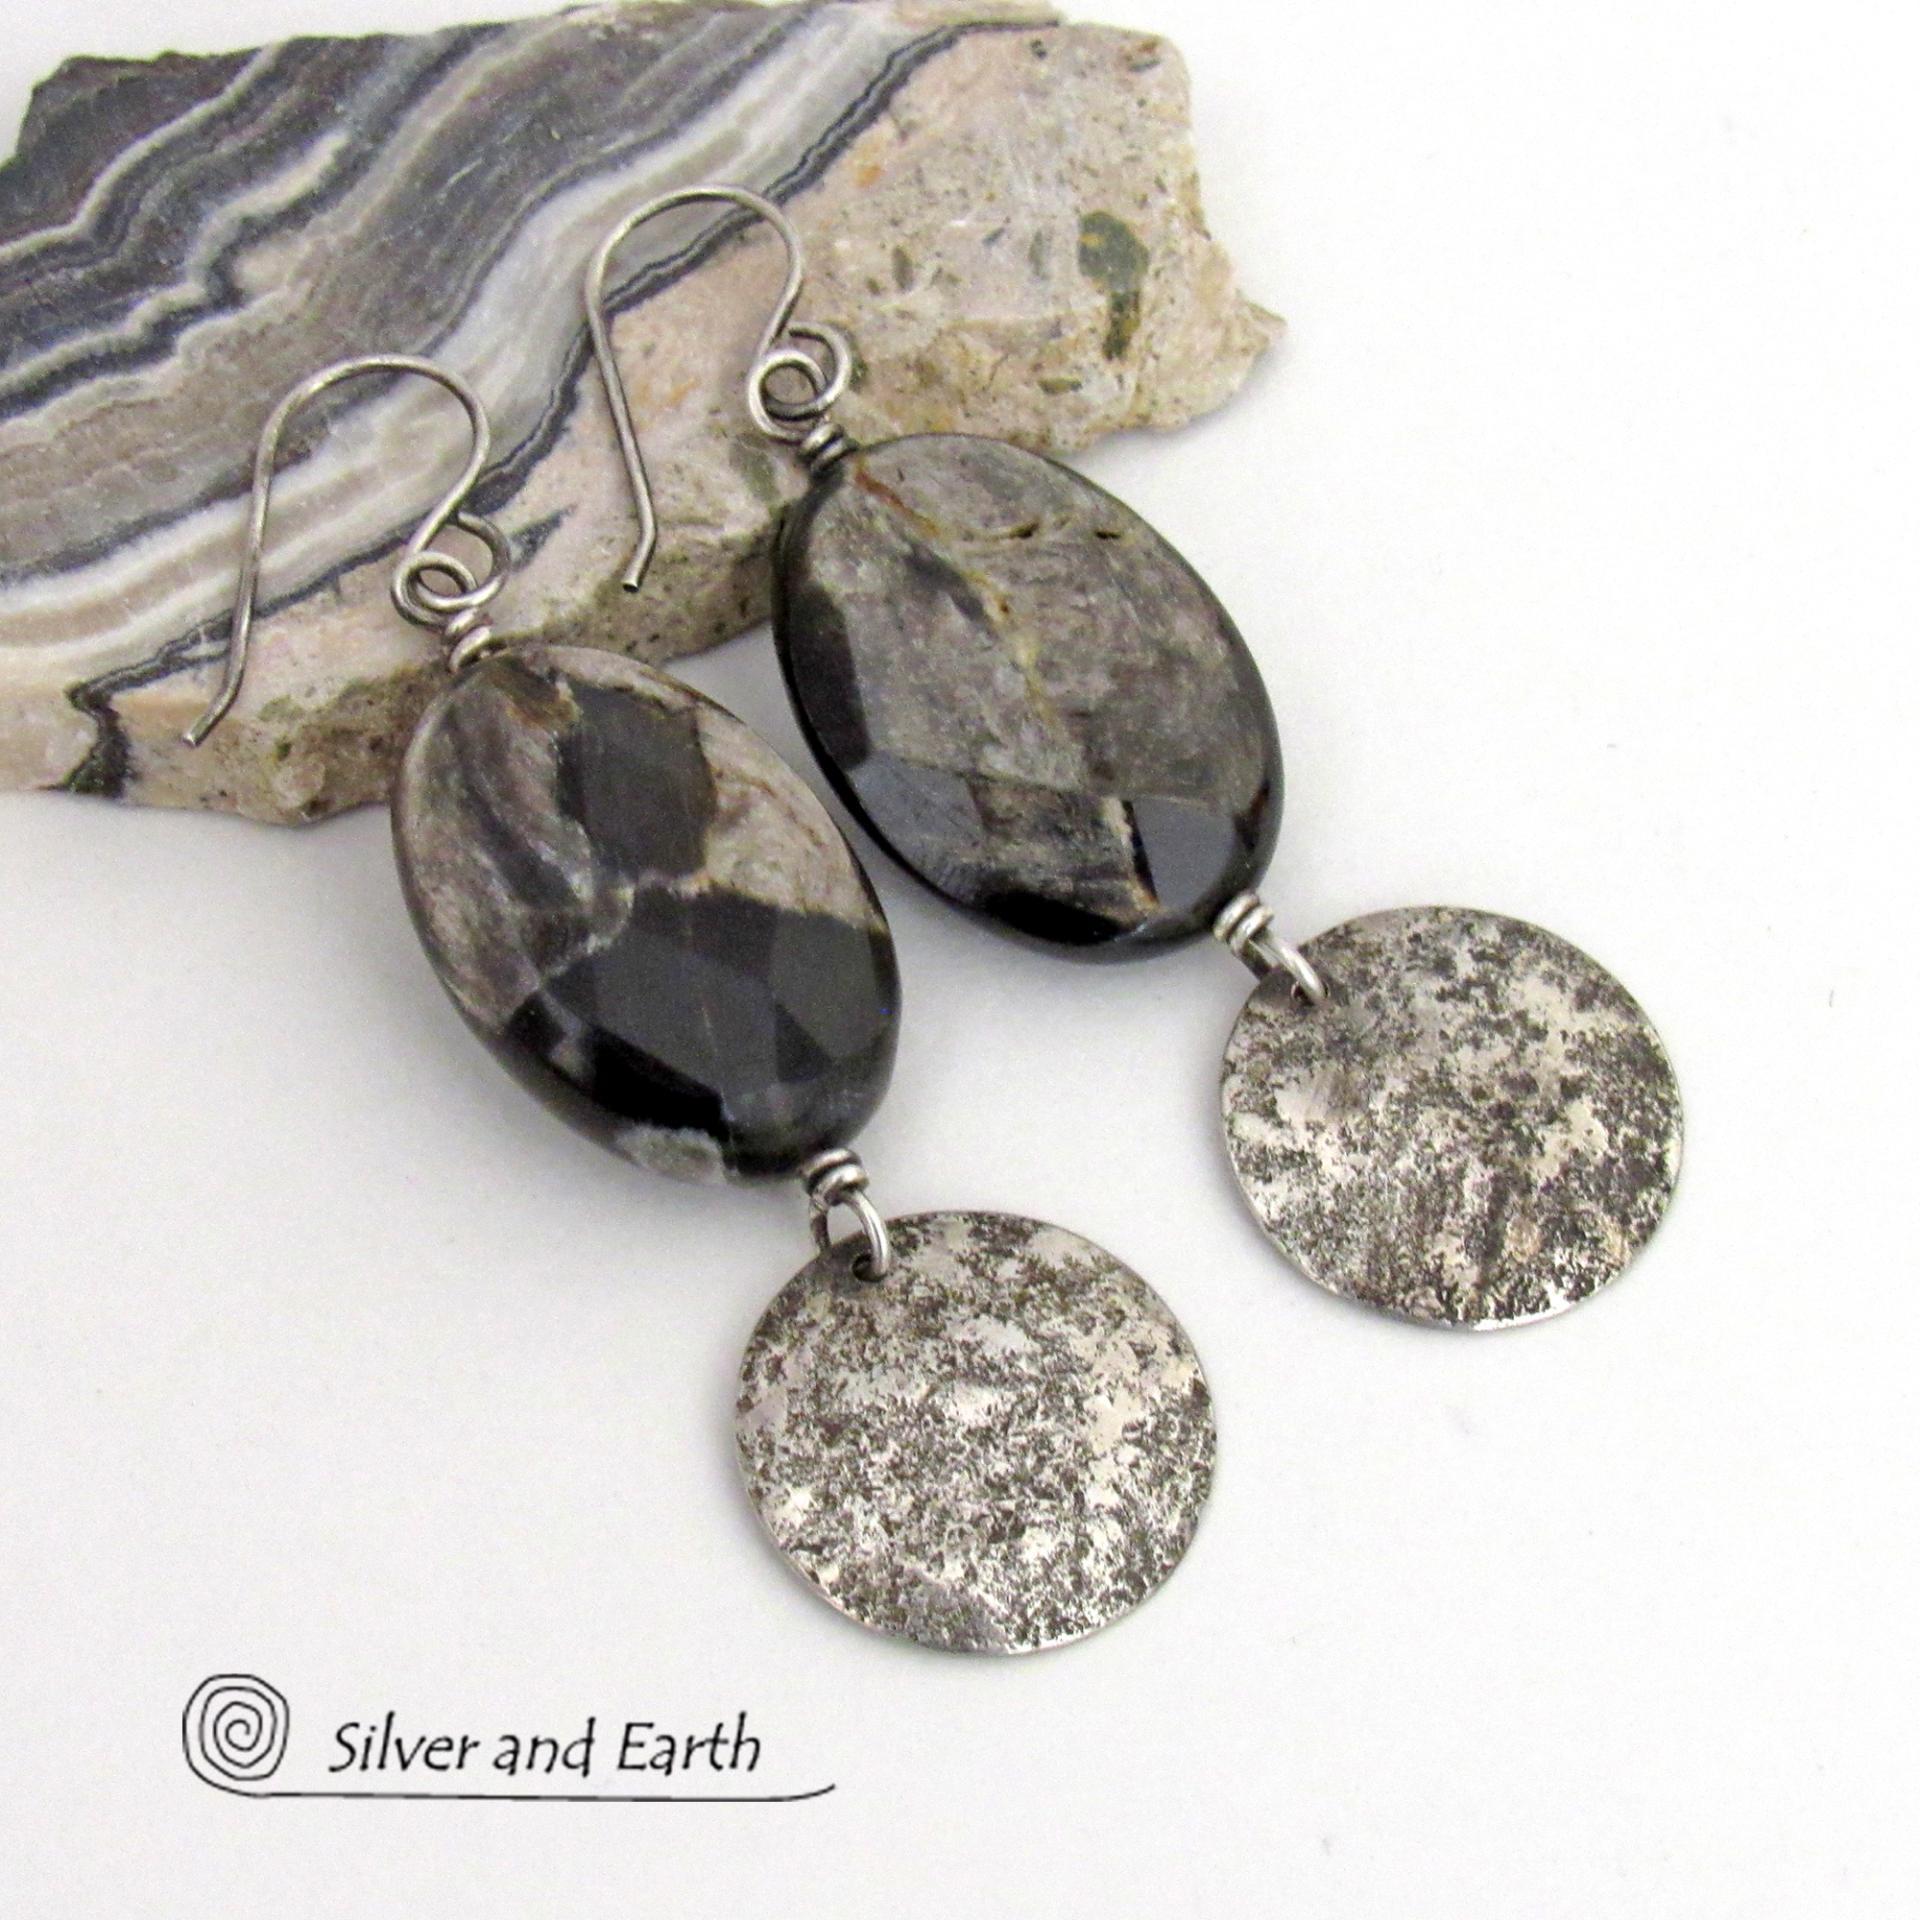 Sterling Silver Earrings with Brown Sparkly Mica Stones - Faceted Gemstone and Sterling Jewelry